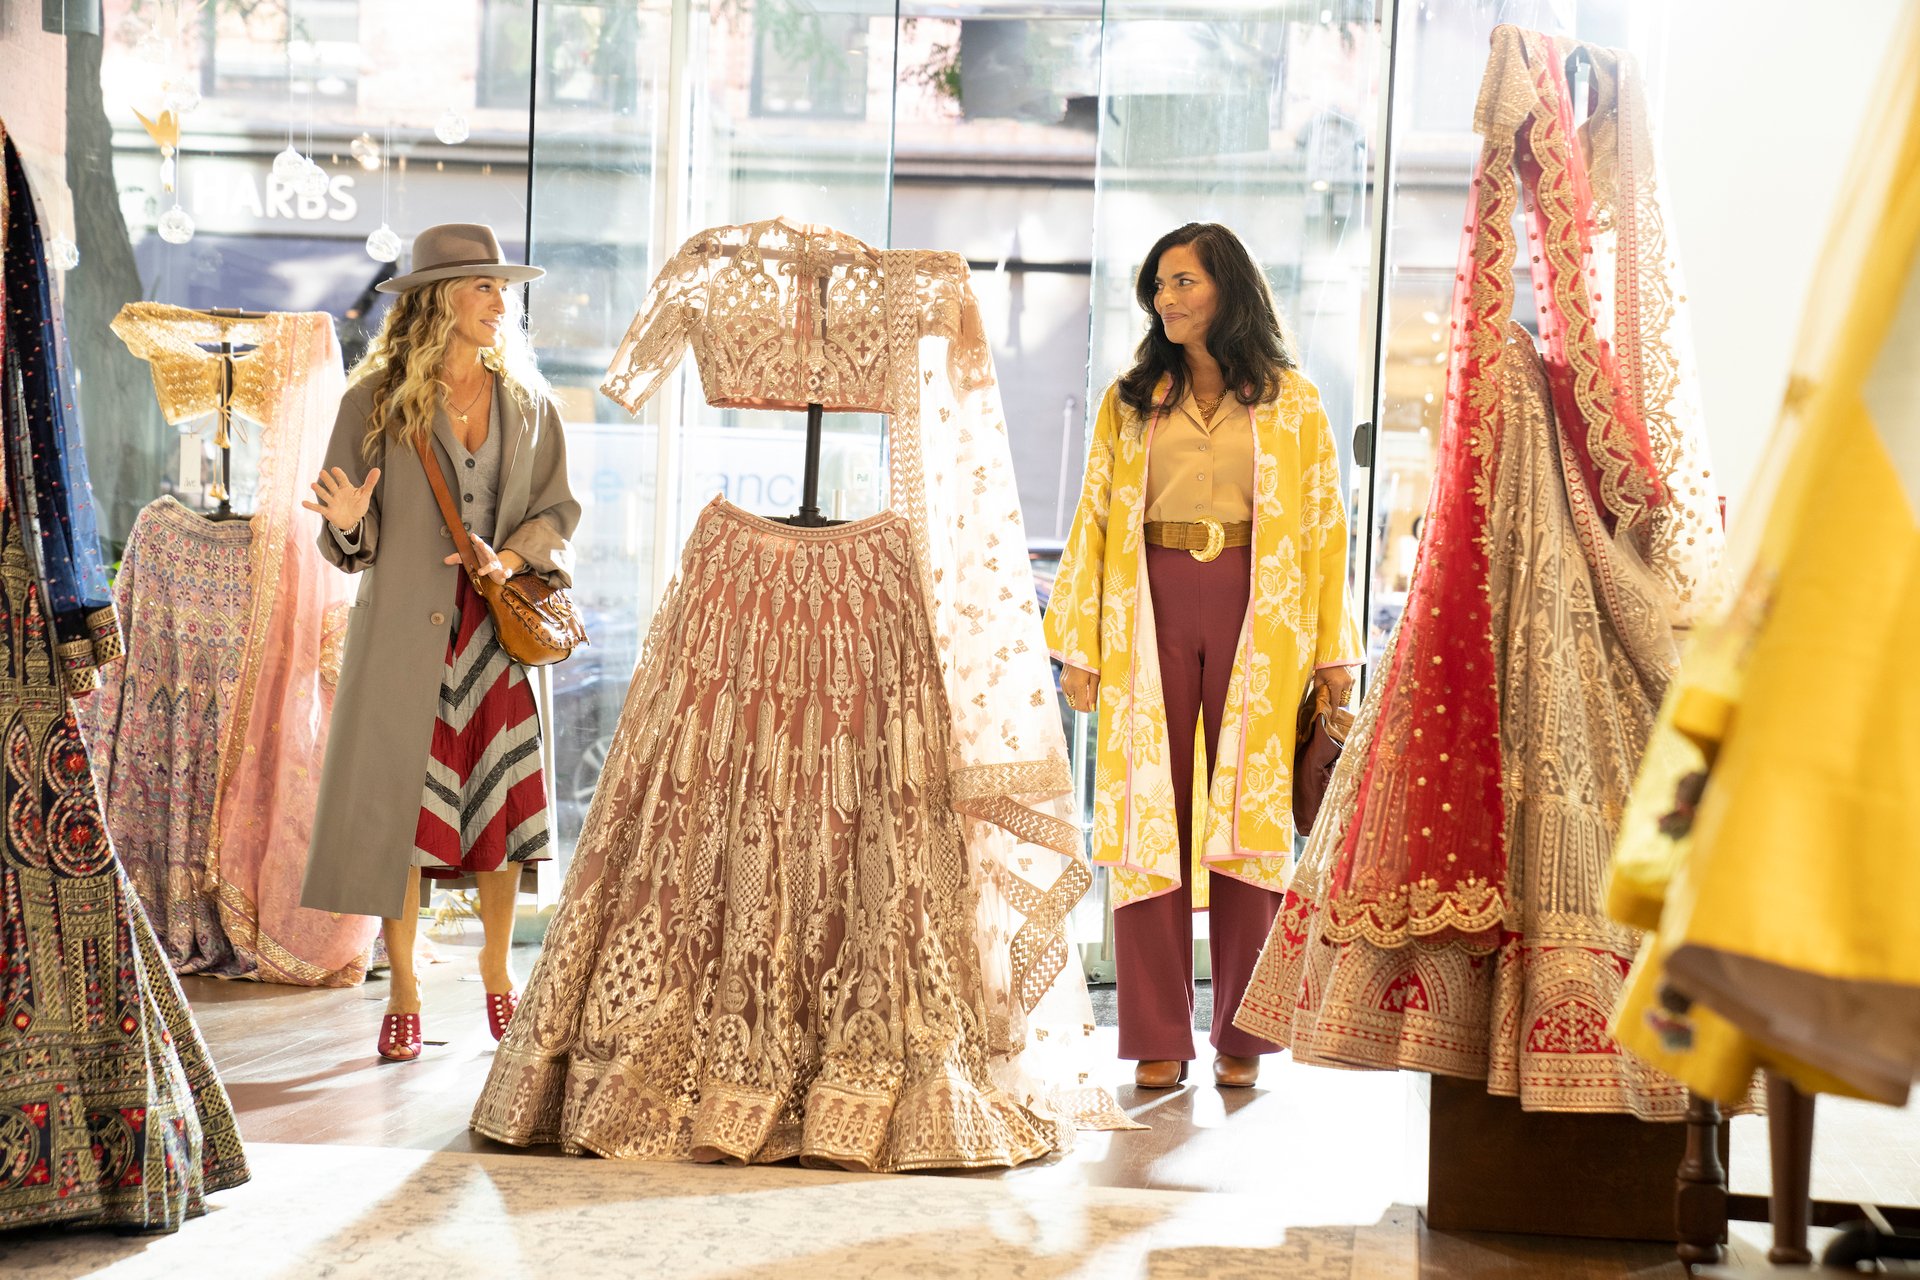 Sarah Jessica Parker and Sarita Choudhury in a sari shop on the set of 'And Just Like That...'